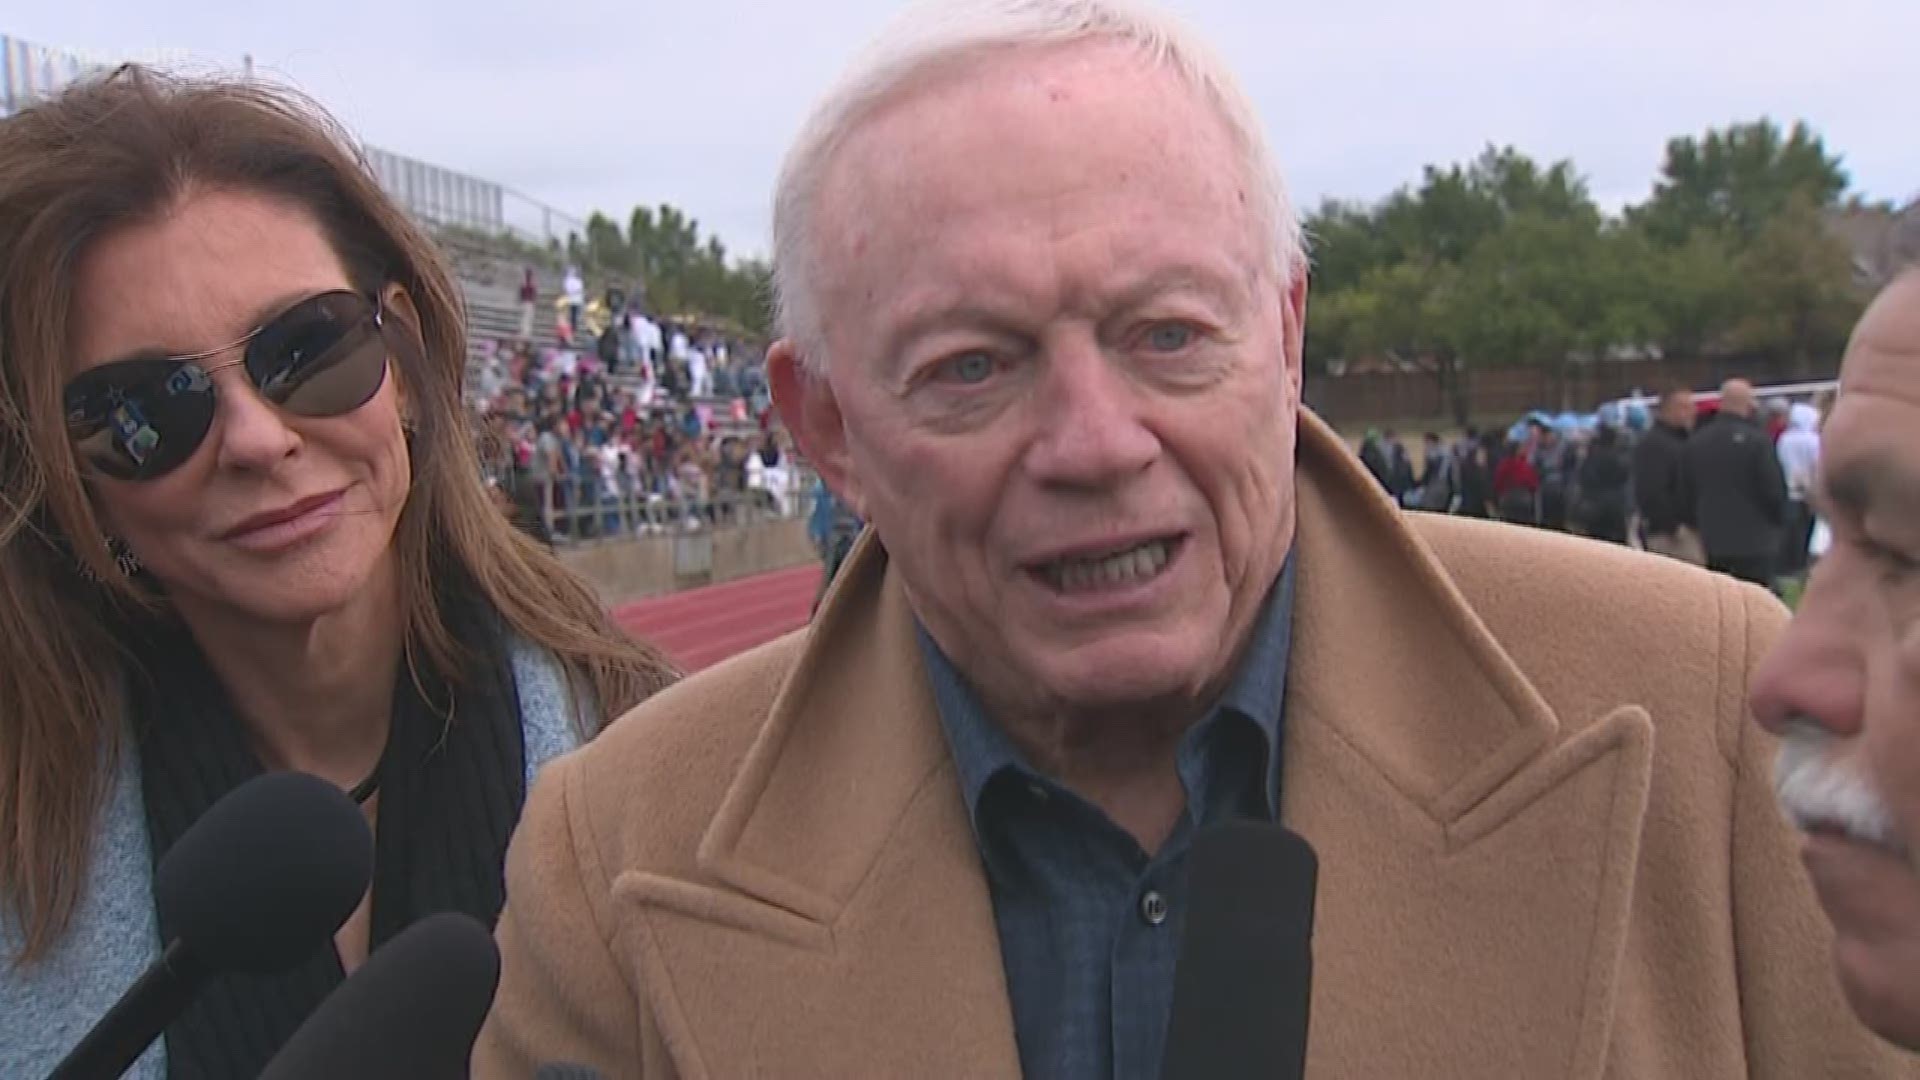 Dallas Cowboys Owner Jerry Jones donated $1 million. The athletics program will use the money to build a new athletic field, which was destroyed by Sunday's tornado.